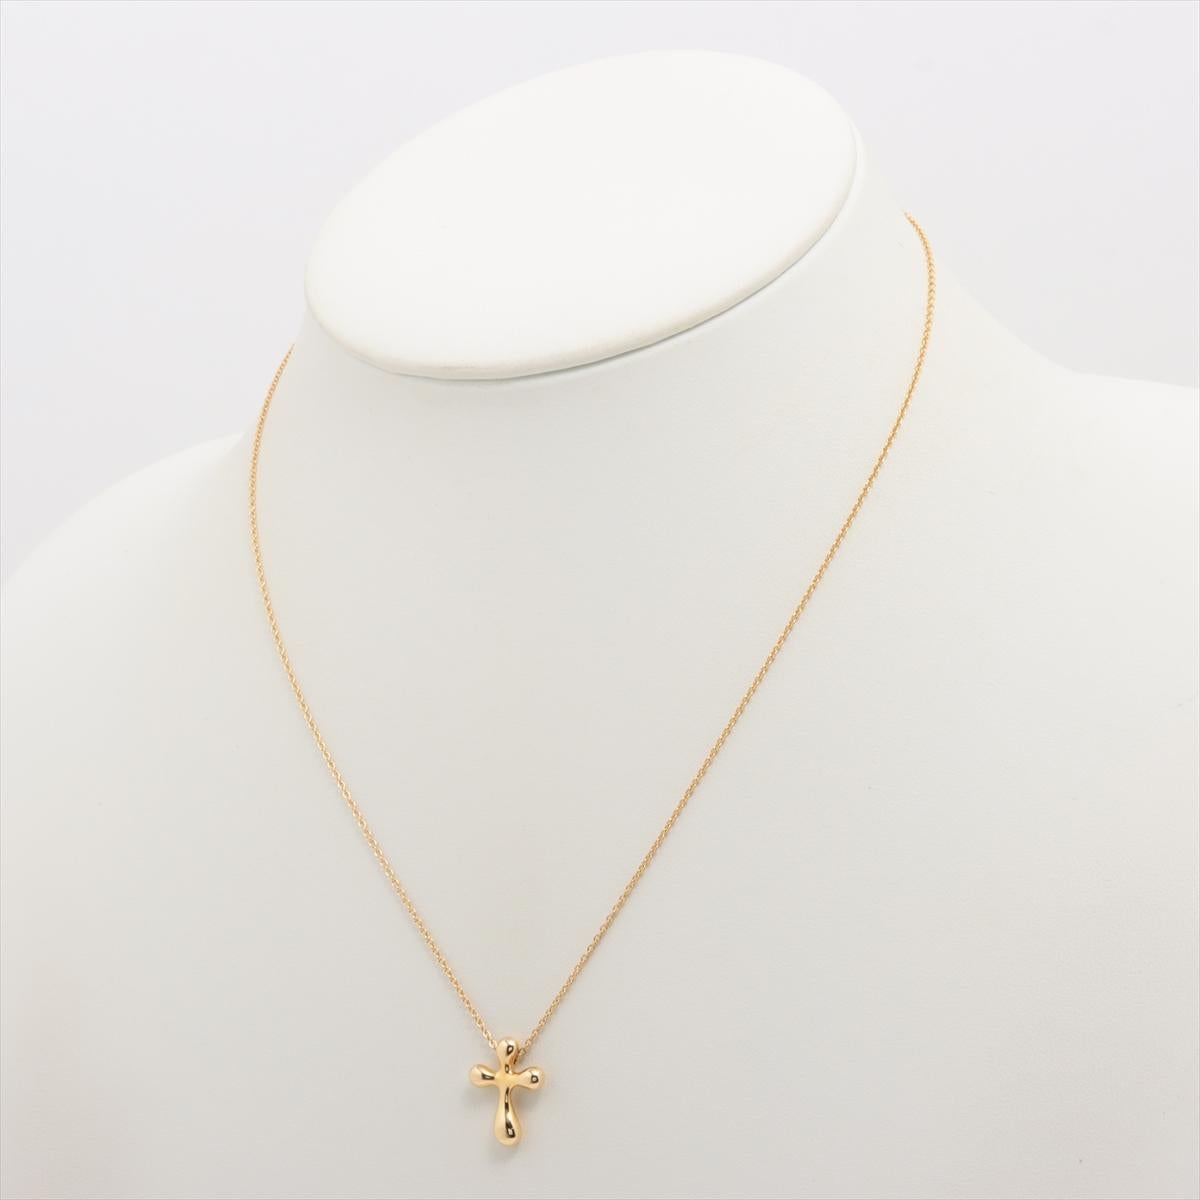 Brand : Tiffany 
Description: Tiffany Small Cross Necklace 
Metal Type: 750YG/Yellow Gold
Weight 3.8g
Condition: Preowned; small signs of wearing
Box -  Not Included
Papers -  Not Included
